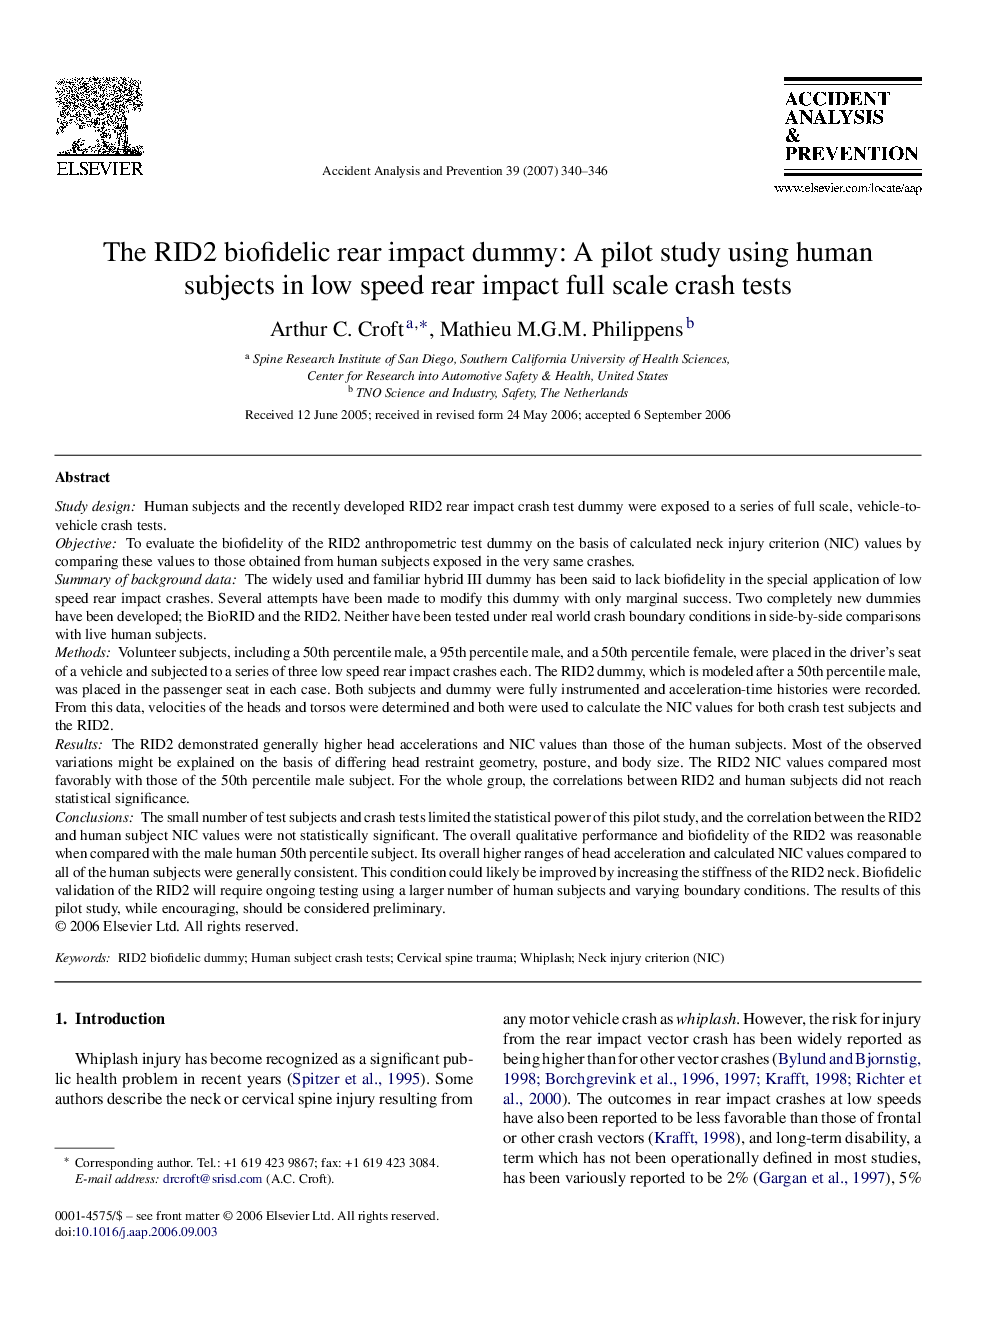 The RID2 biofidelic rear impact dummy: A pilot study using human subjects in low speed rear impact full scale crash tests